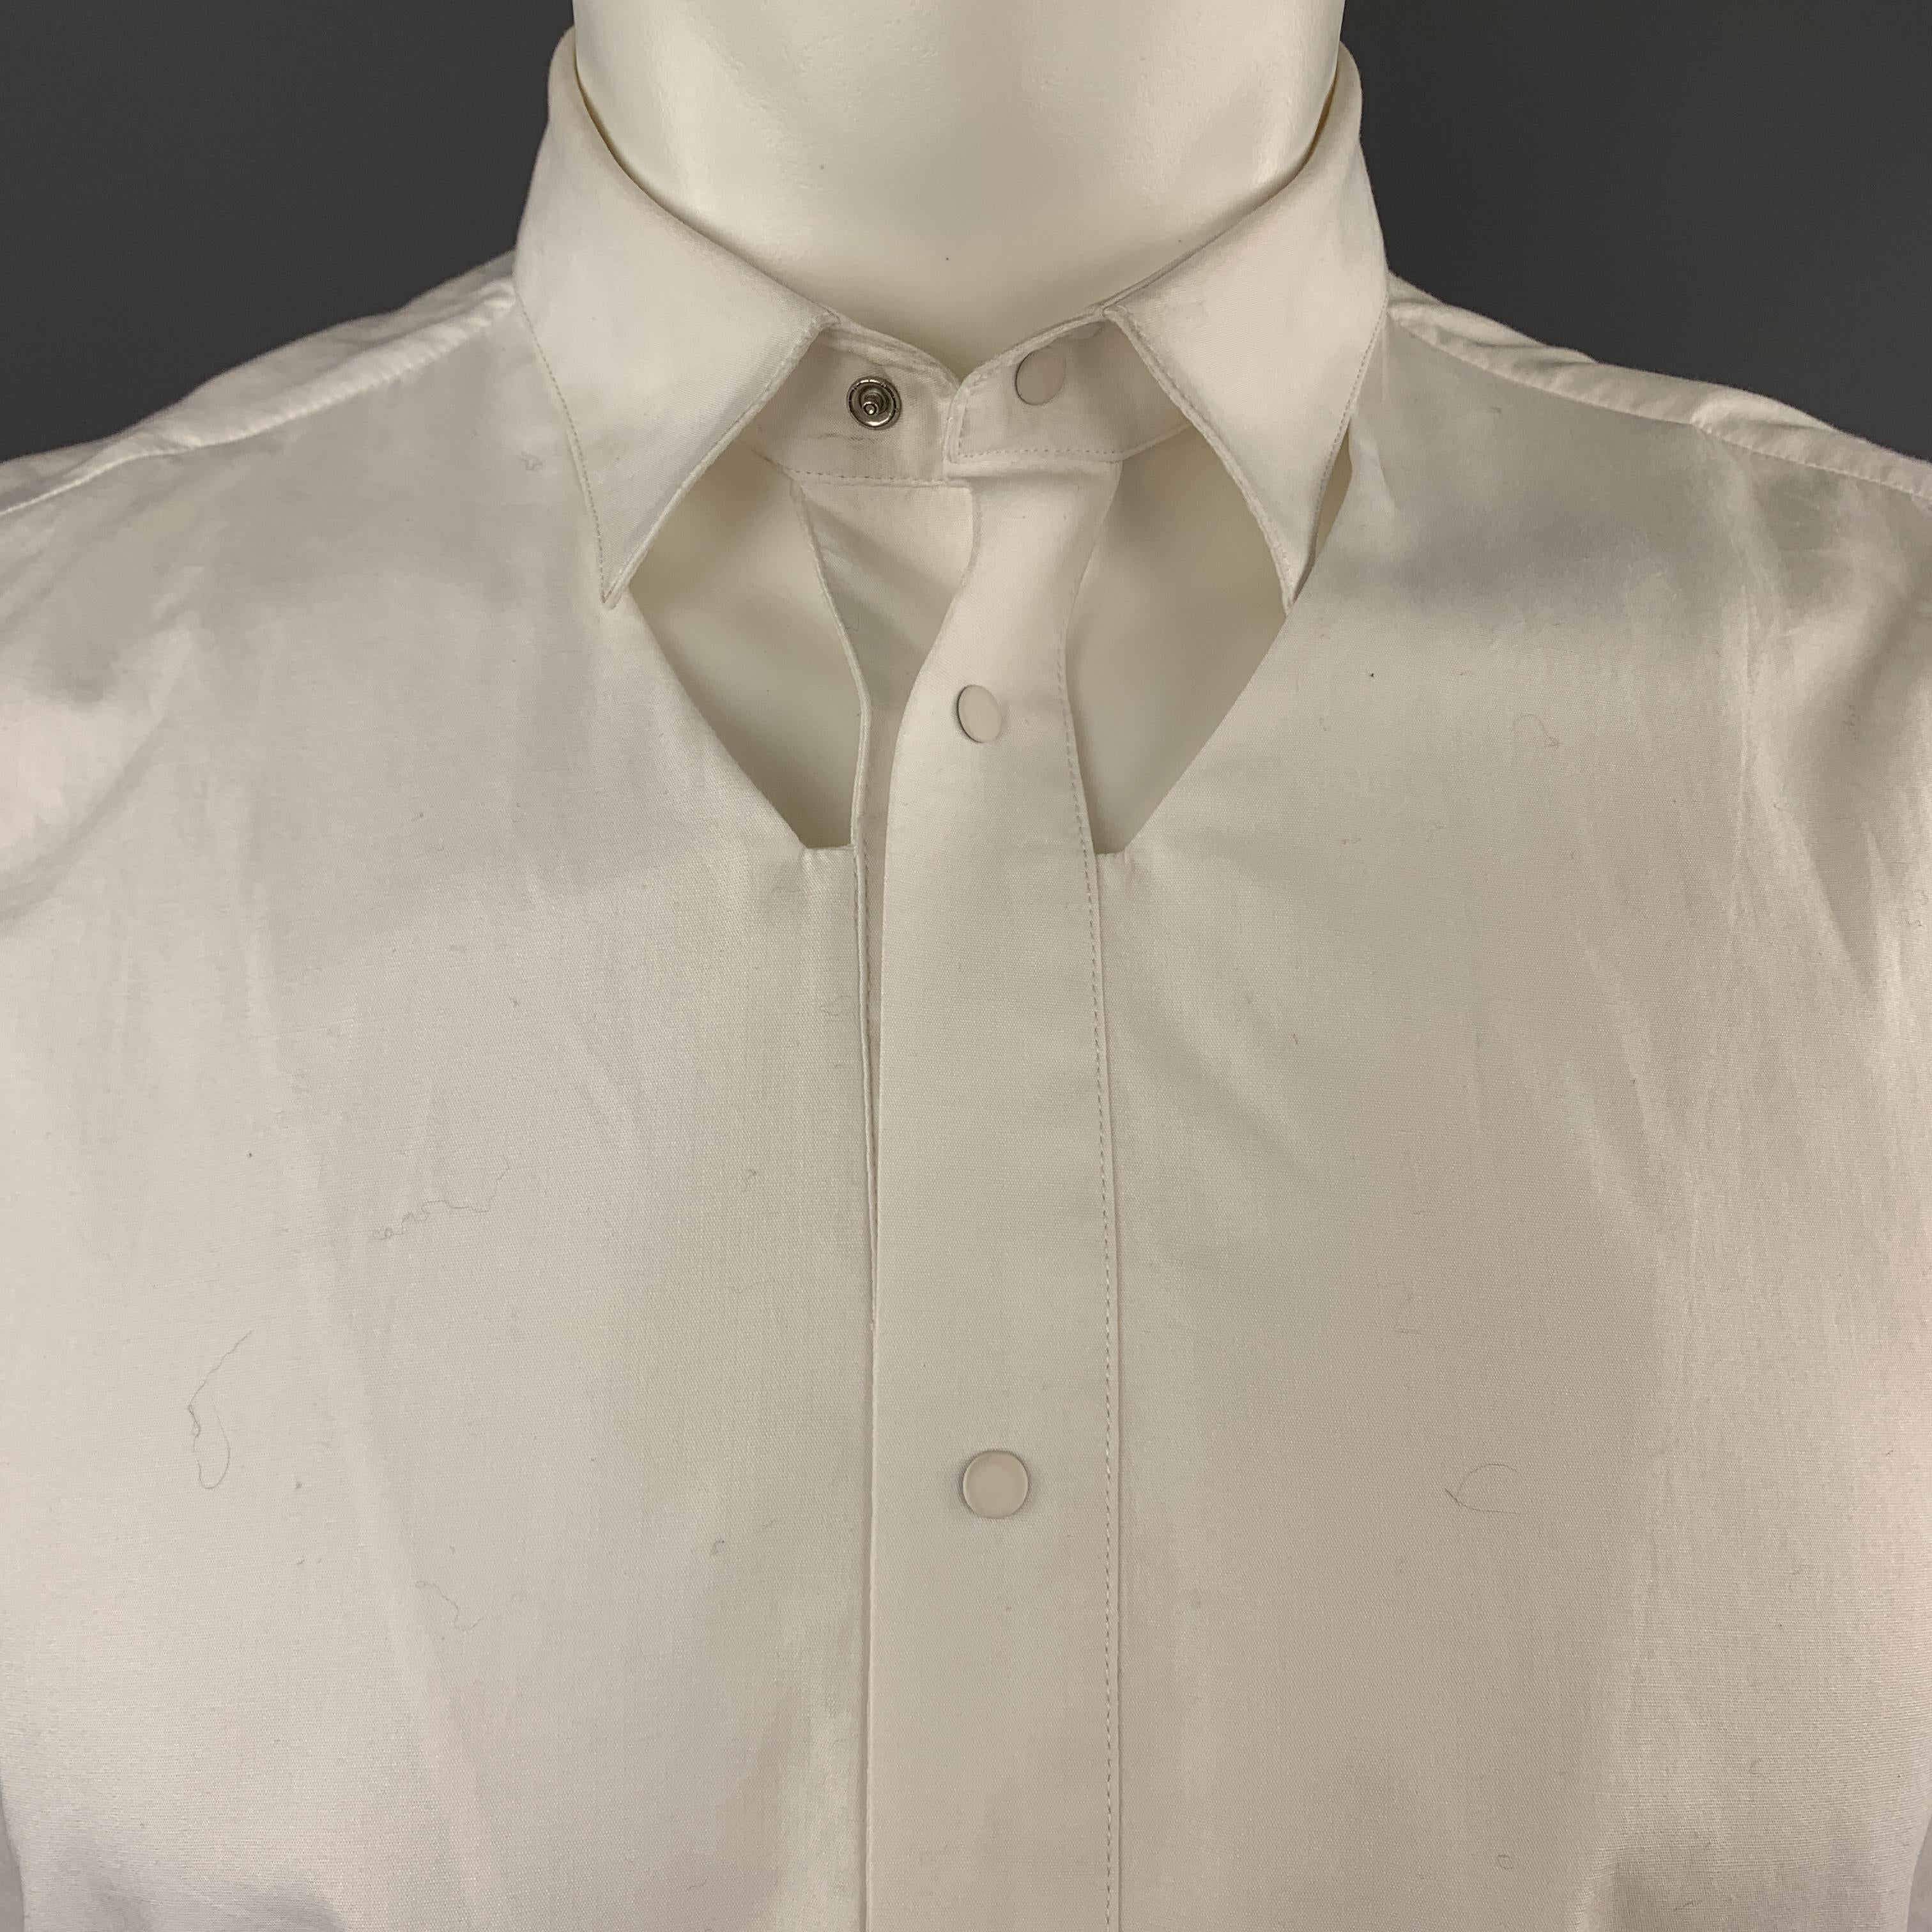 MUGLER by NICOLA FORMICHETTI shirt comes in white cotton with a pointed collar, white snap closure front, and chest cutouts. Wear throughout. As-is. 

Good Pre-Owned Condition.
Marked: 40

Measurements:

Shoulder: 17 in.
Chest: 40 in.
Length: 28.5